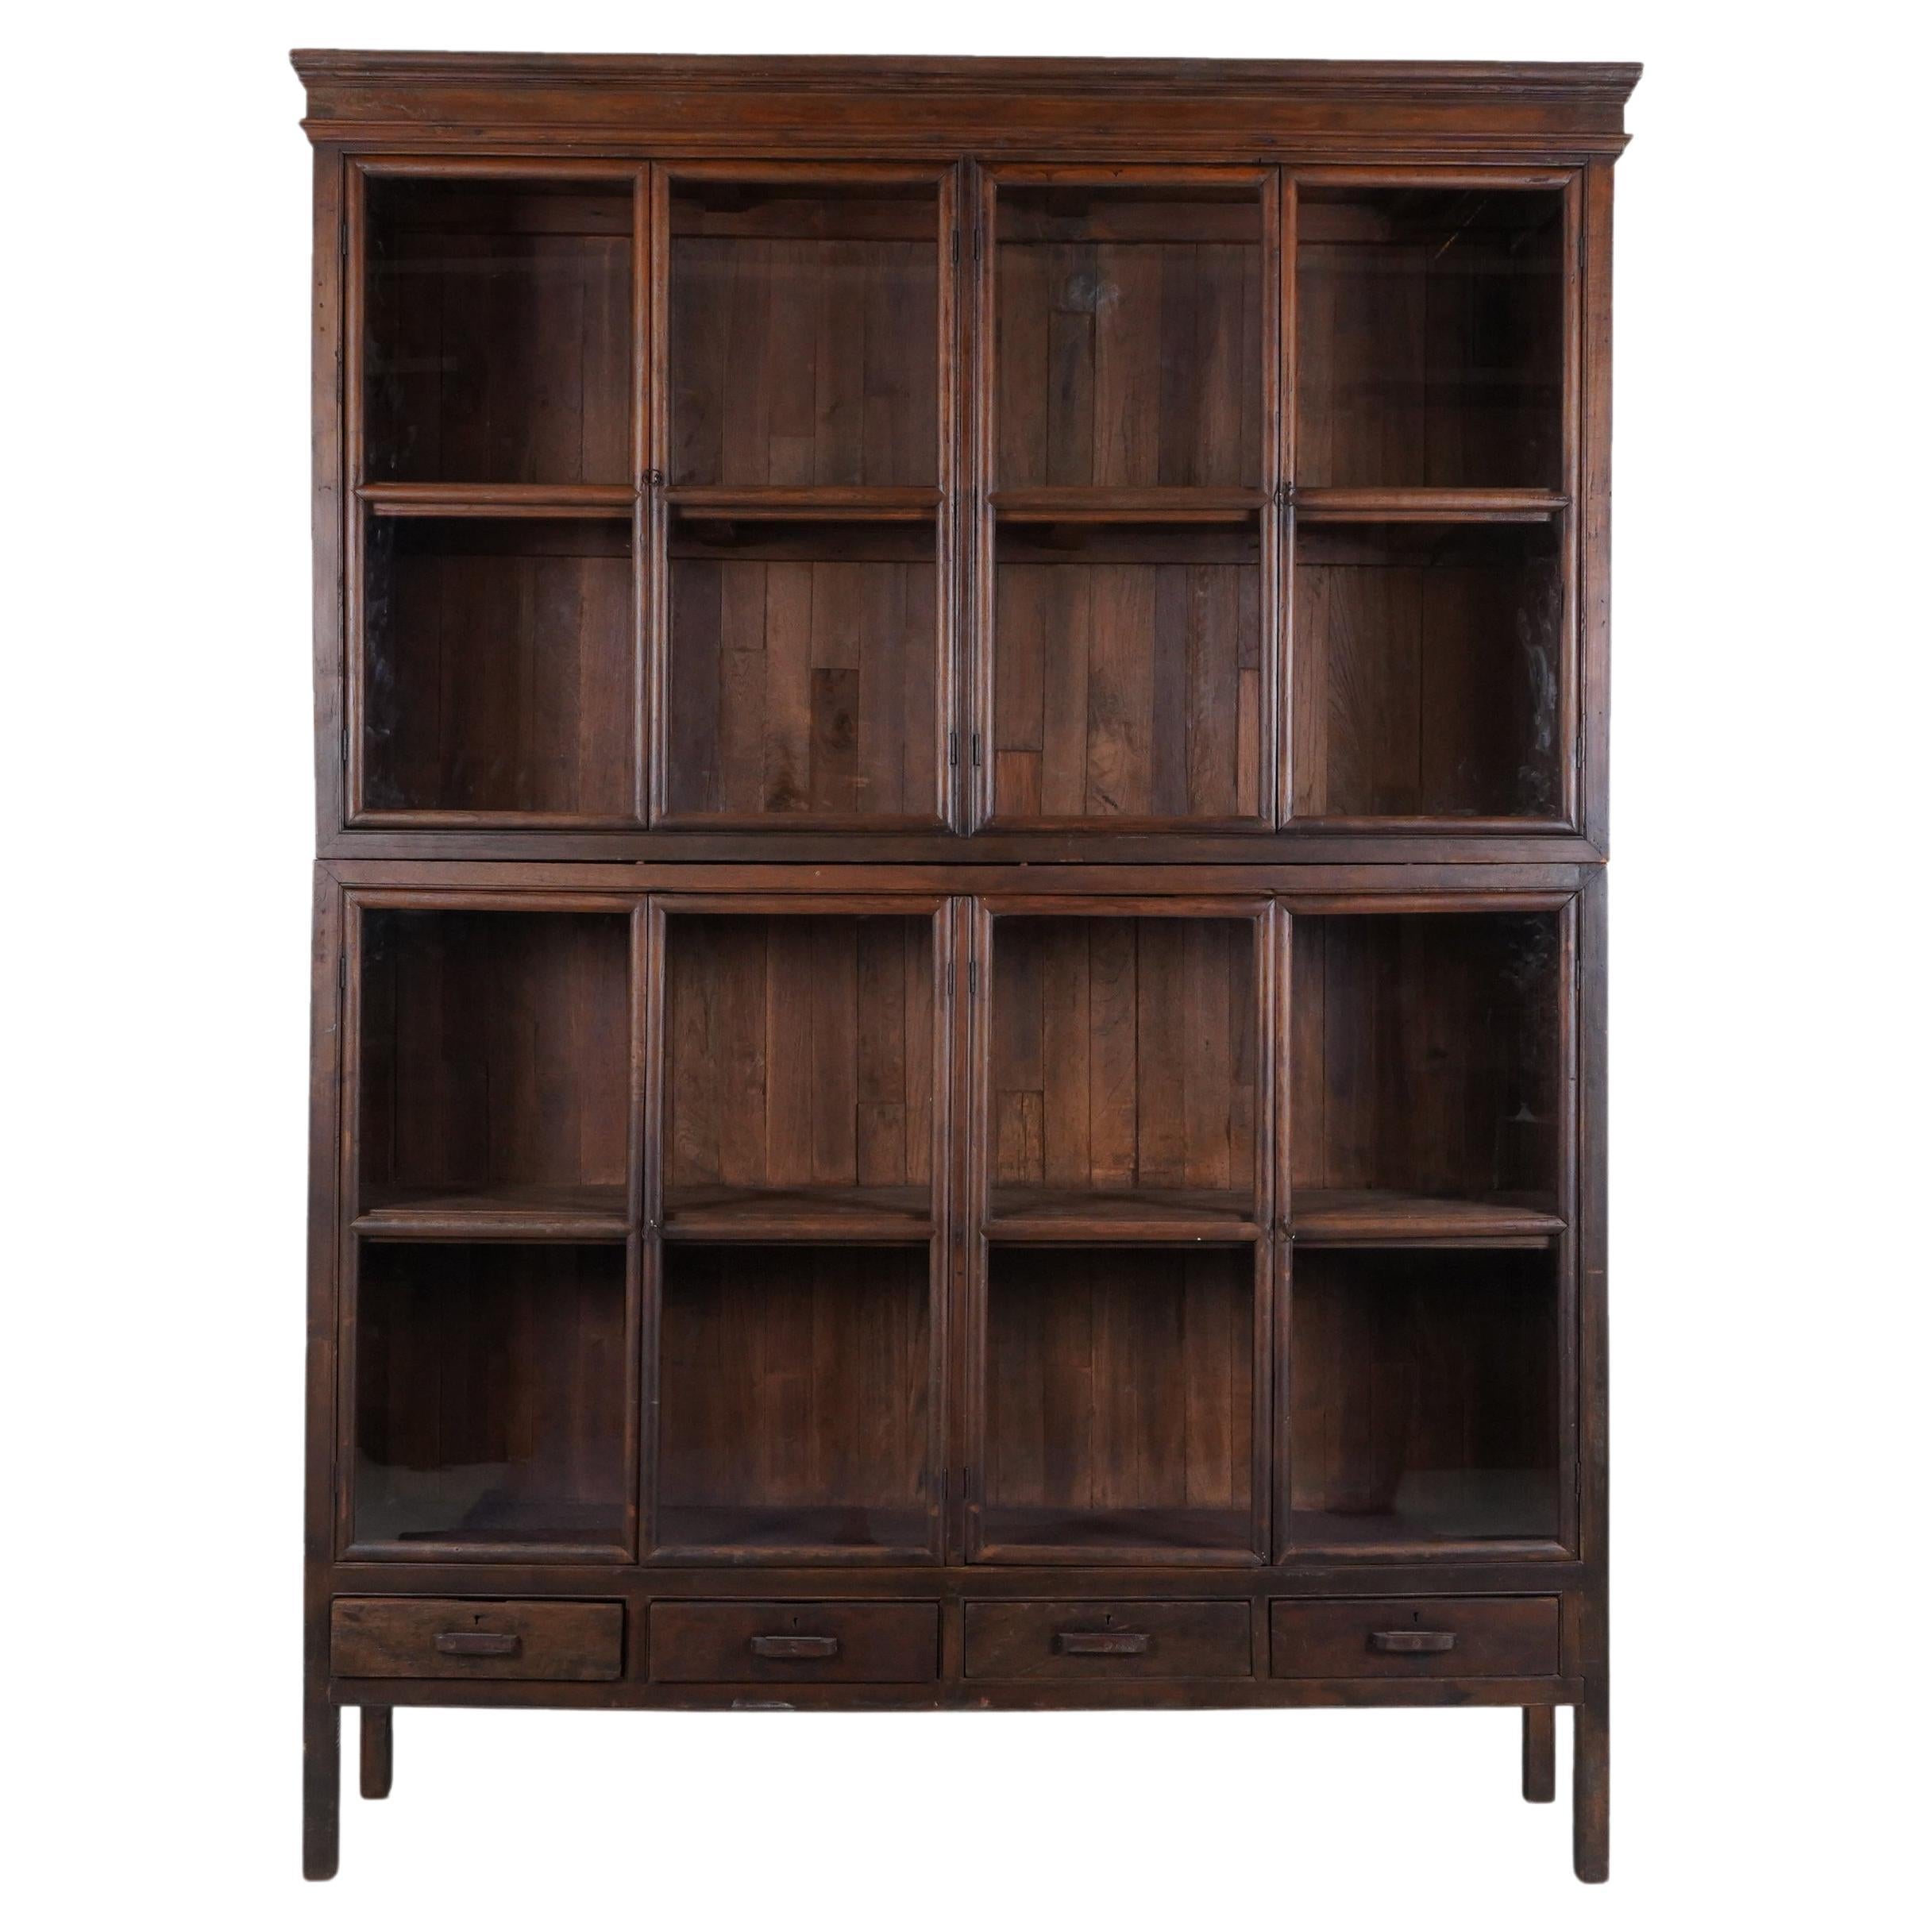 A Tall British Colonial Bookcase